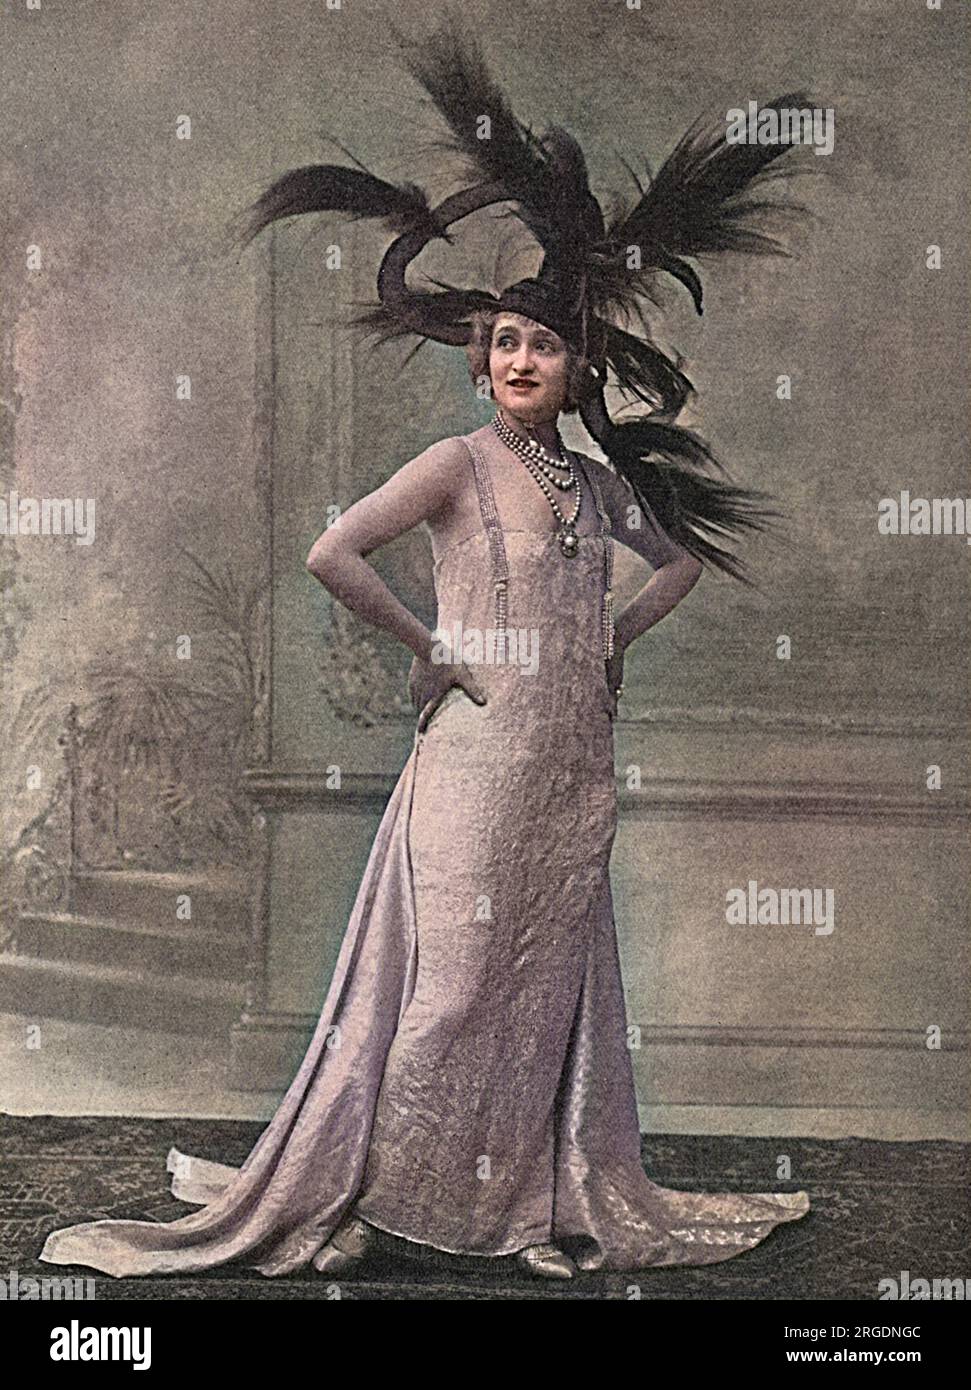 Gaby Deslys (1884 - 1920), French actress, music hall artiste and sometime lover of King Manuel II of Portugal, pictured in 1915 when she was appearing in '5064 Gerrard.'  Known for her magnificent stage costumes, she is wearing a particularly flamboyant headdress. Stock Photo